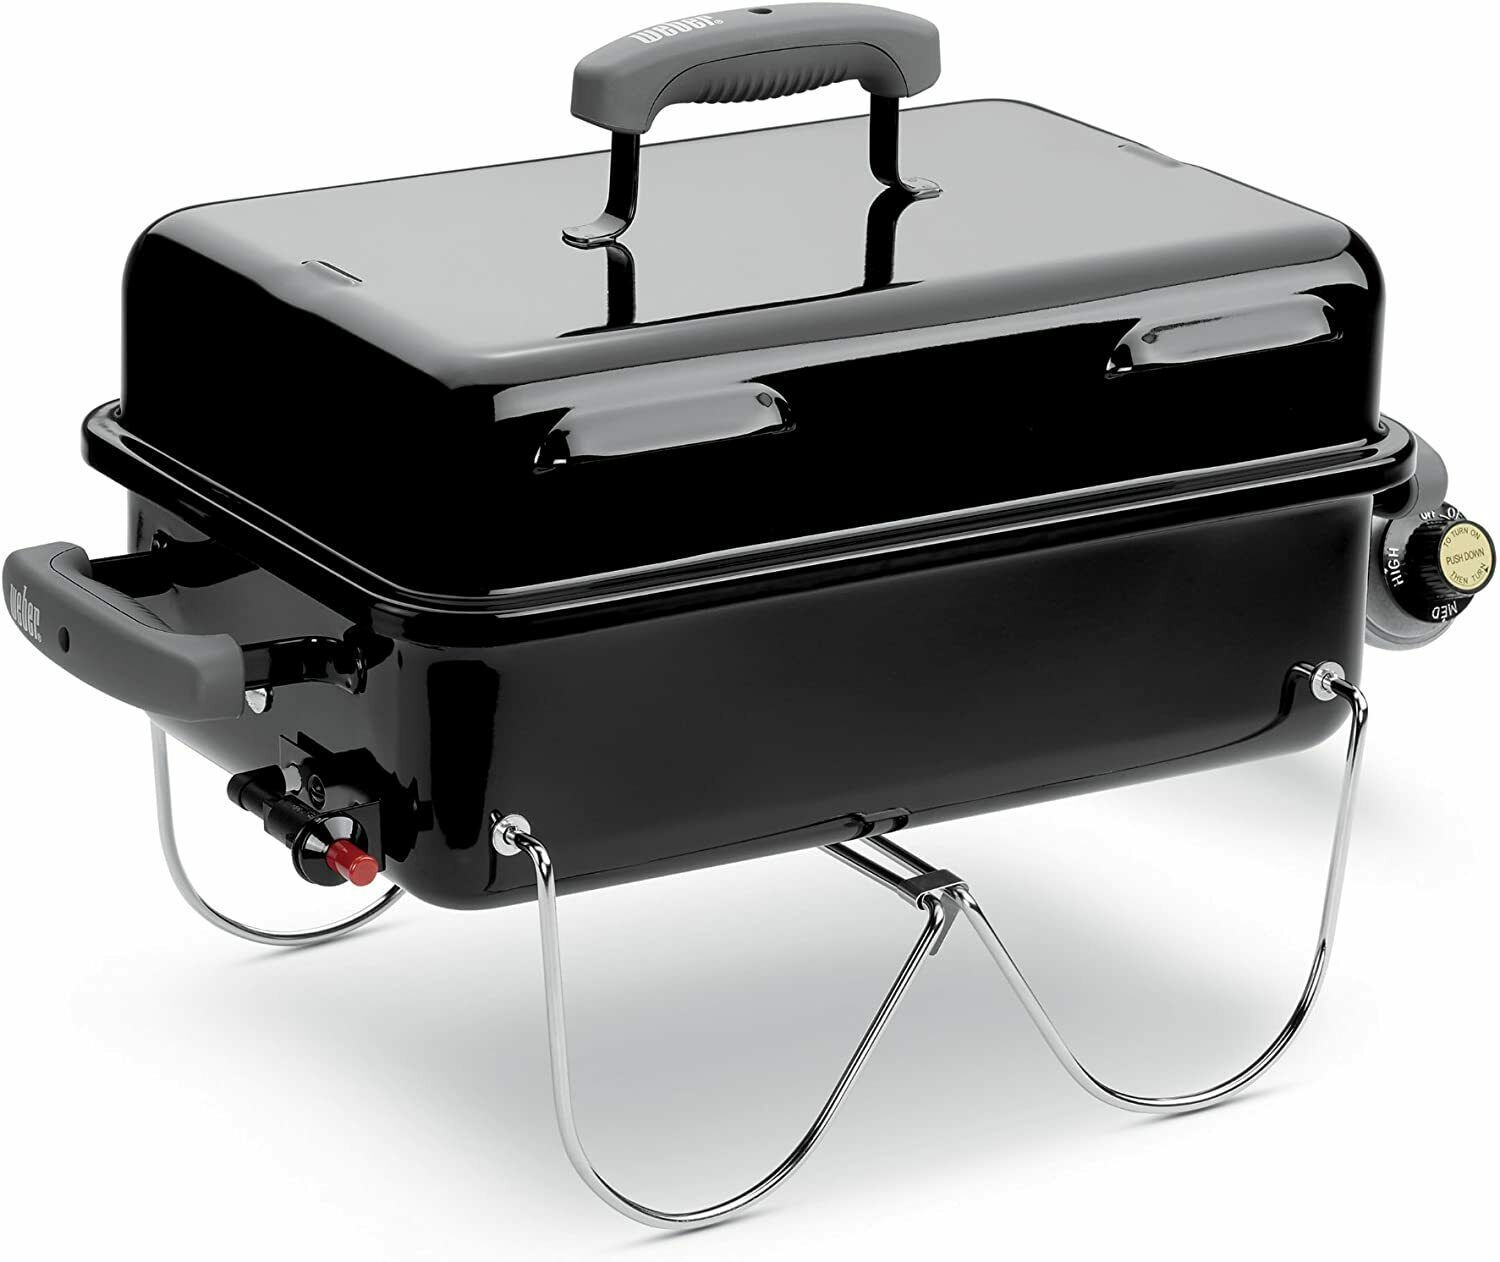 Portable Liquid Propane Gas Grill For Camping/Hiking/Picnic/Outdoor - $182.00